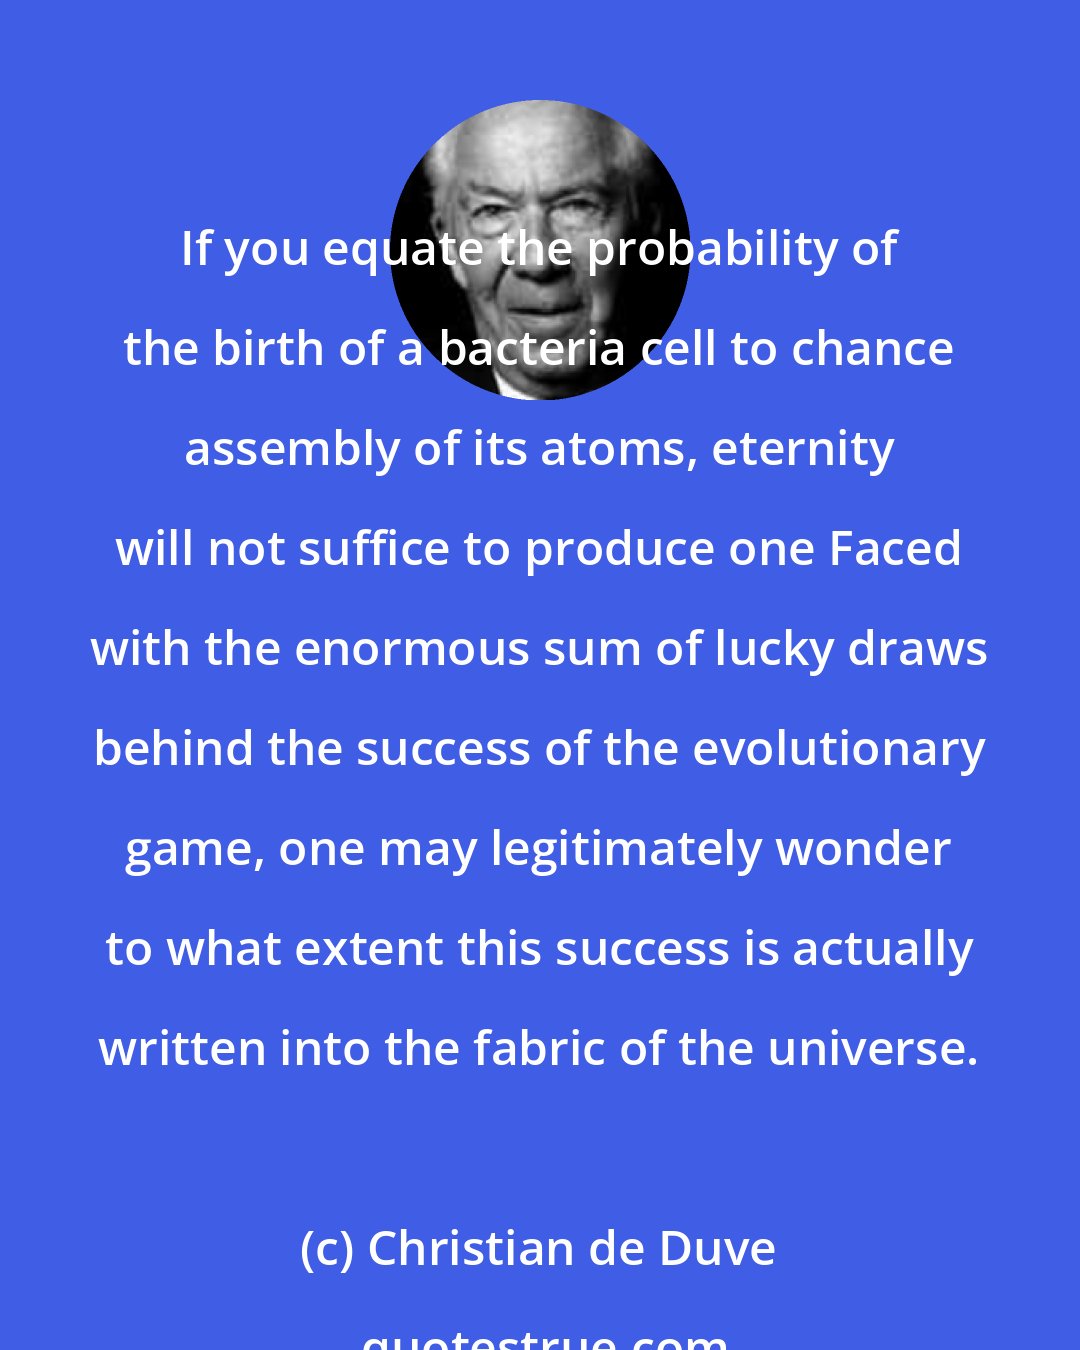 Christian de Duve: If you equate the probability of the birth of a bacteria cell to chance assembly of its atoms, eternity will not suffice to produce one Faced with the enormous sum of lucky draws behind the success of the evolutionary game, one may legitimately wonder to what extent this success is actually written into the fabric of the universe.